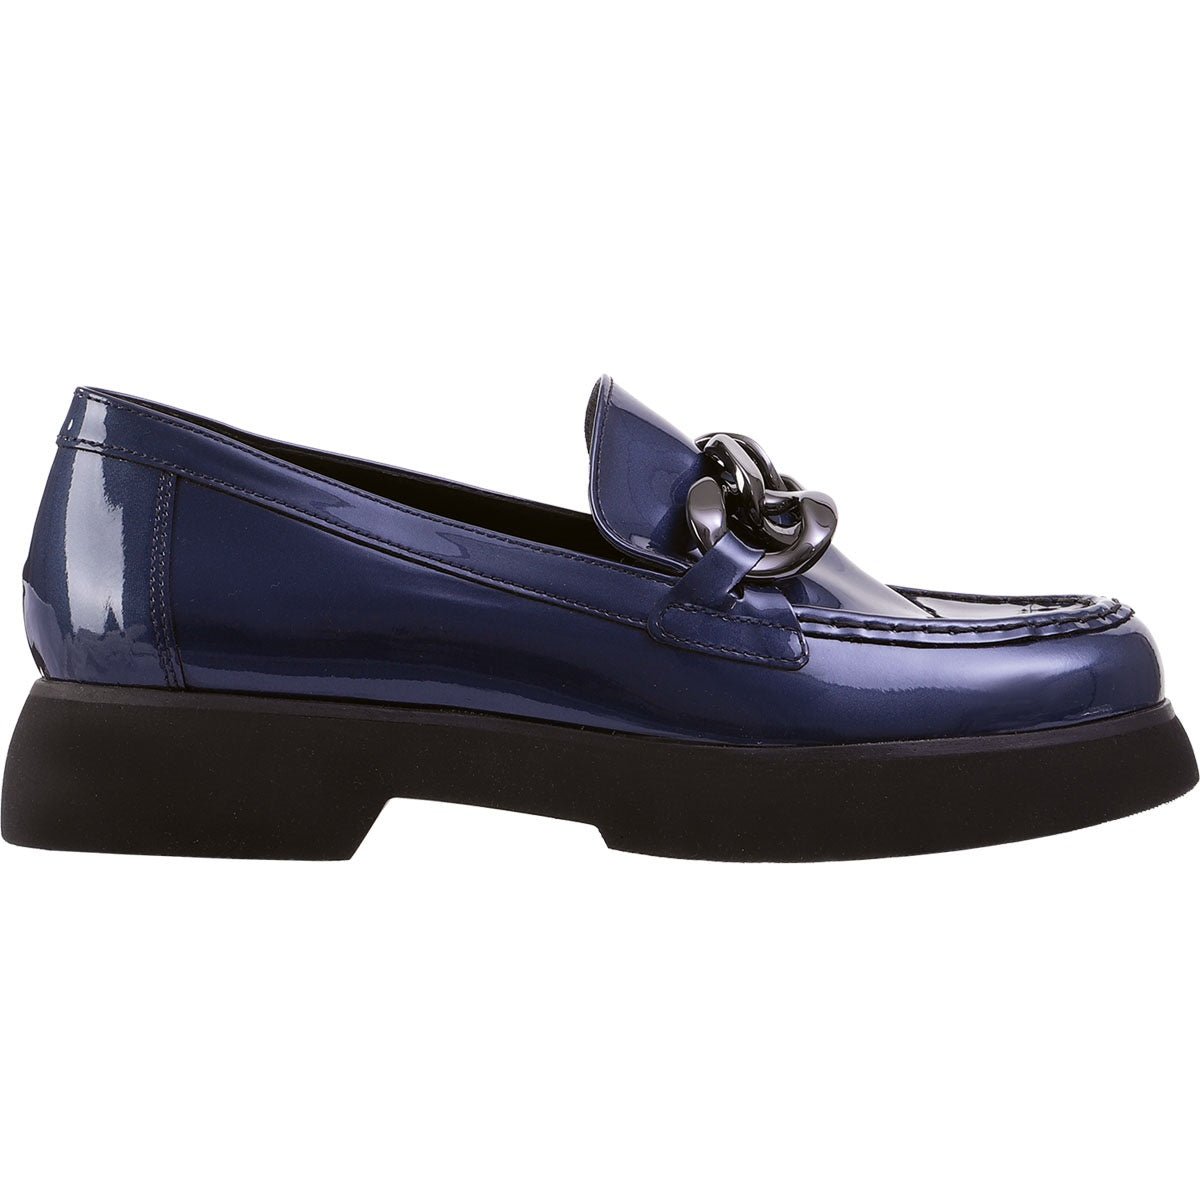 'Stacy' women's loafer - Patent blue - Chaplinshoes'Stacy' women's loafer - Patent blueHögl